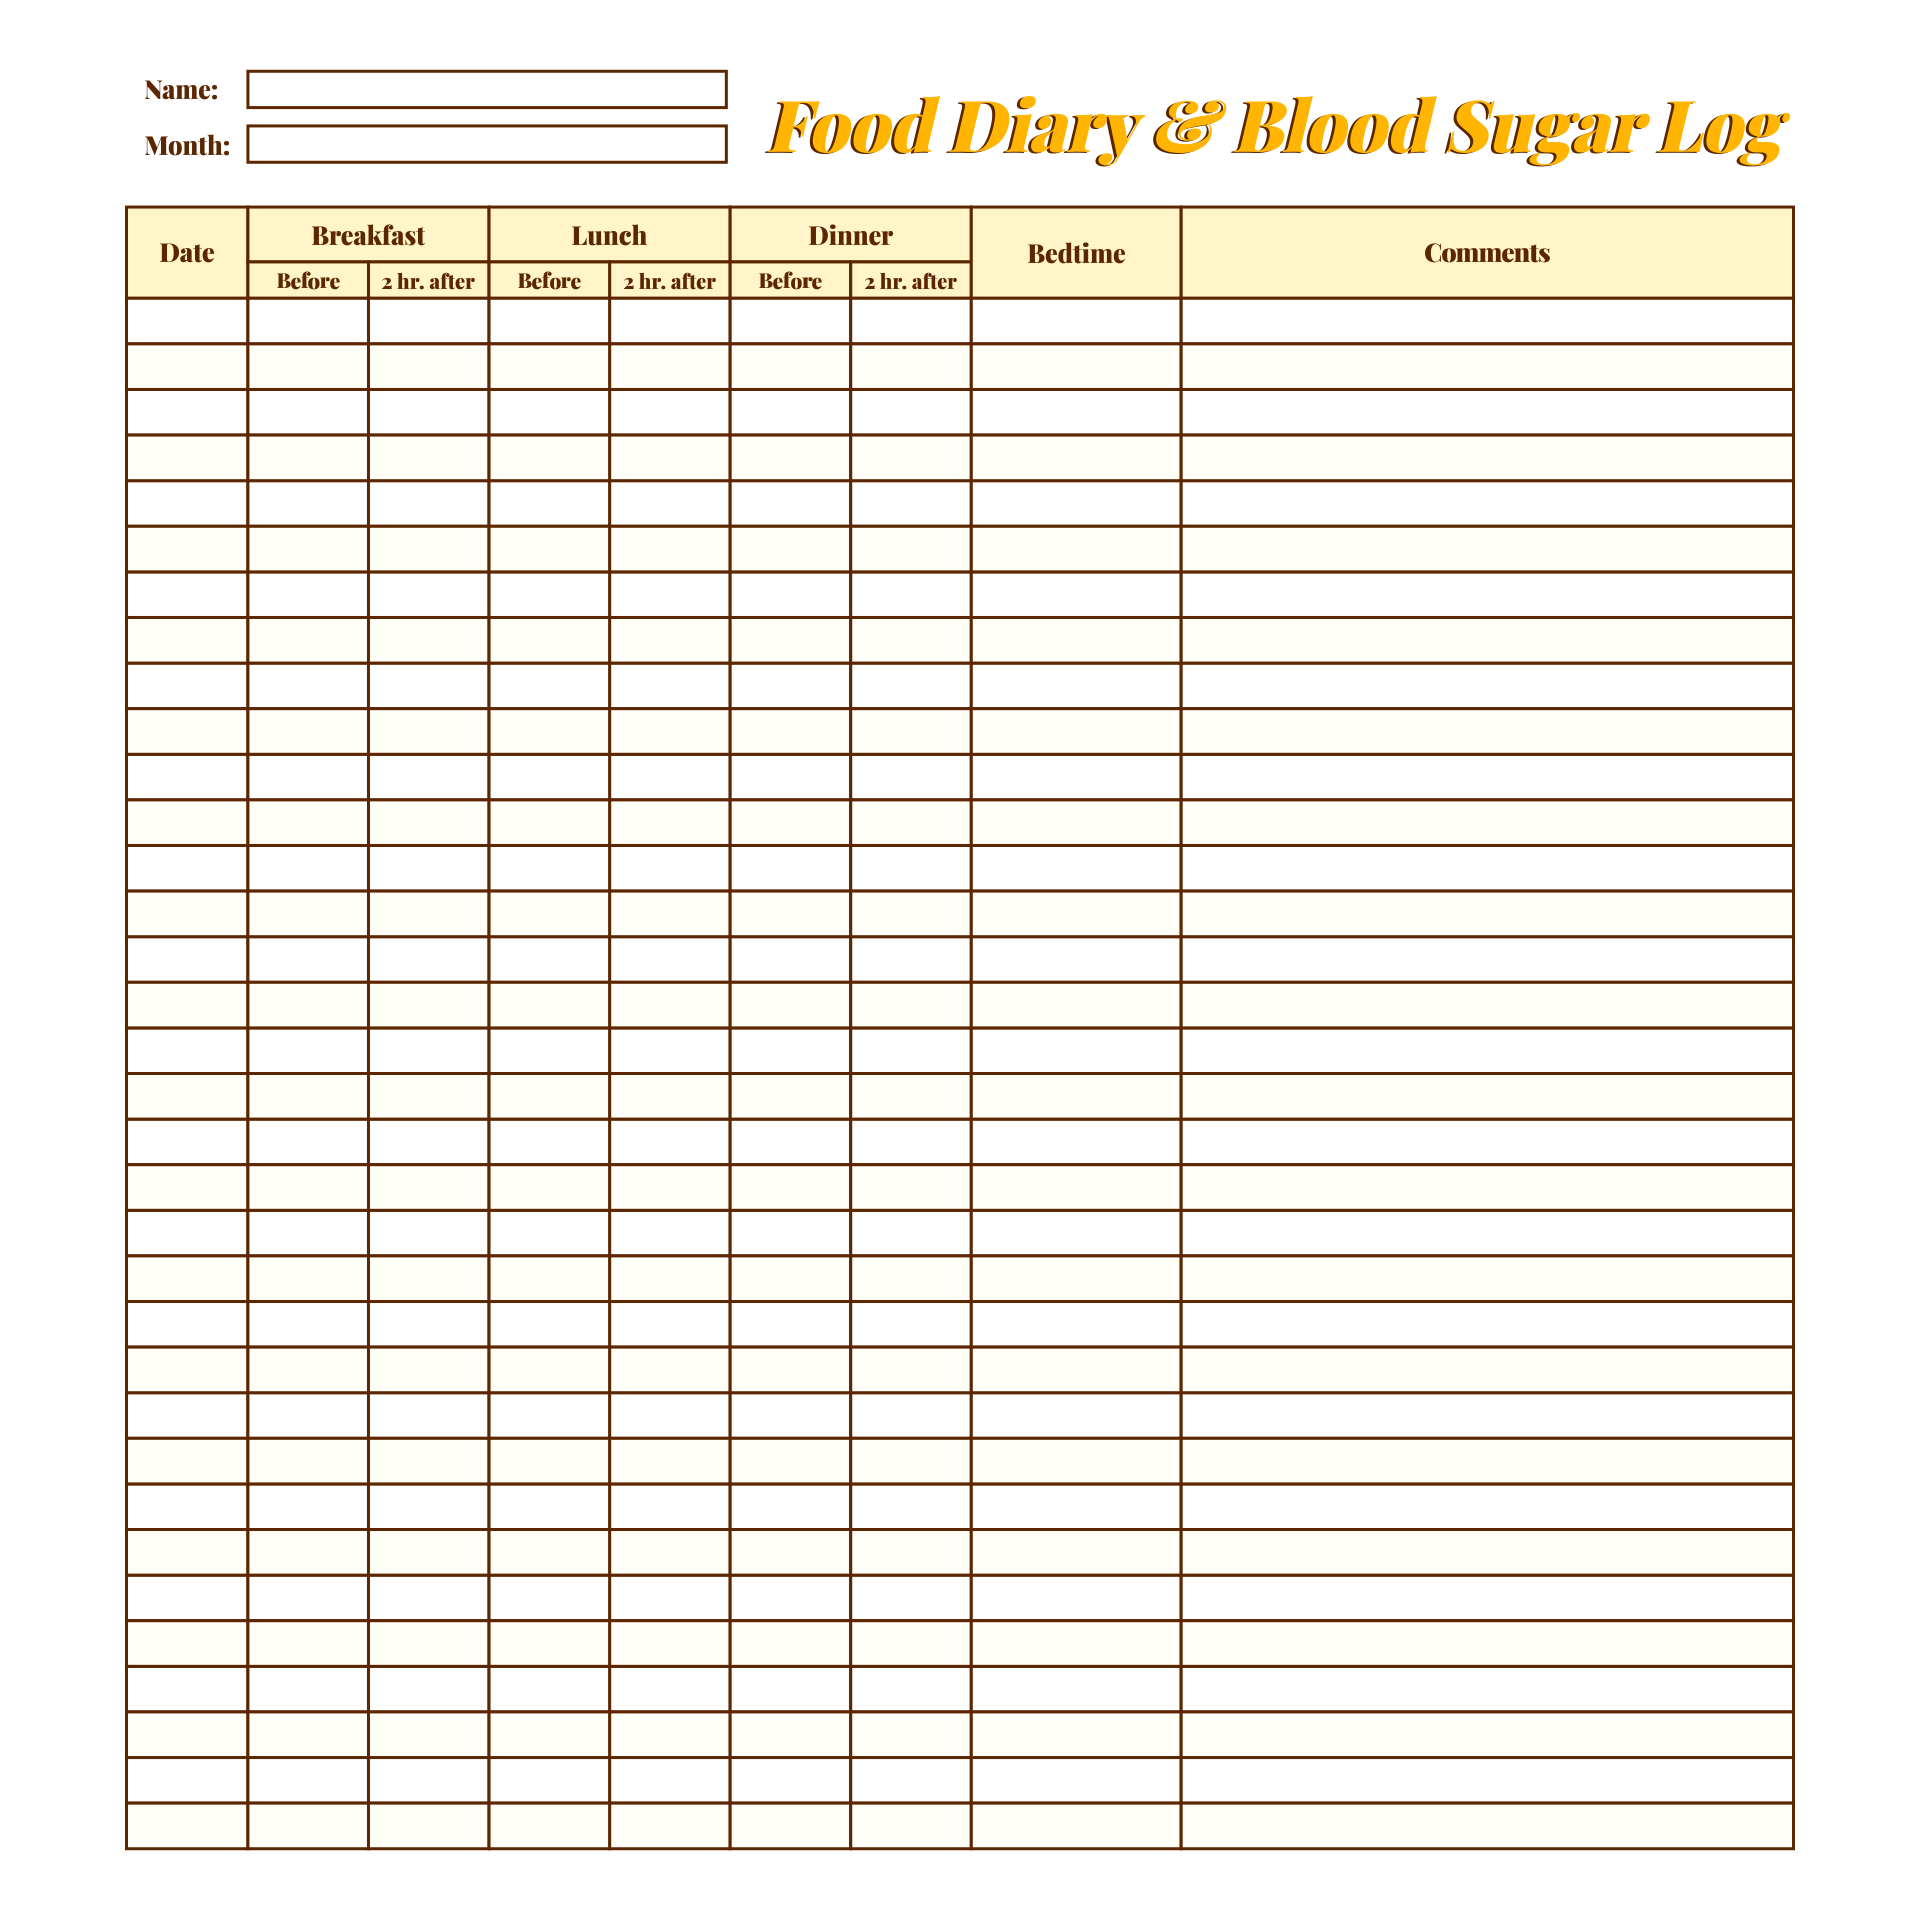 blood-sugar-log-book-for-women-premium-quality-cover-logbook-to-monitor-insulin-by-pampered